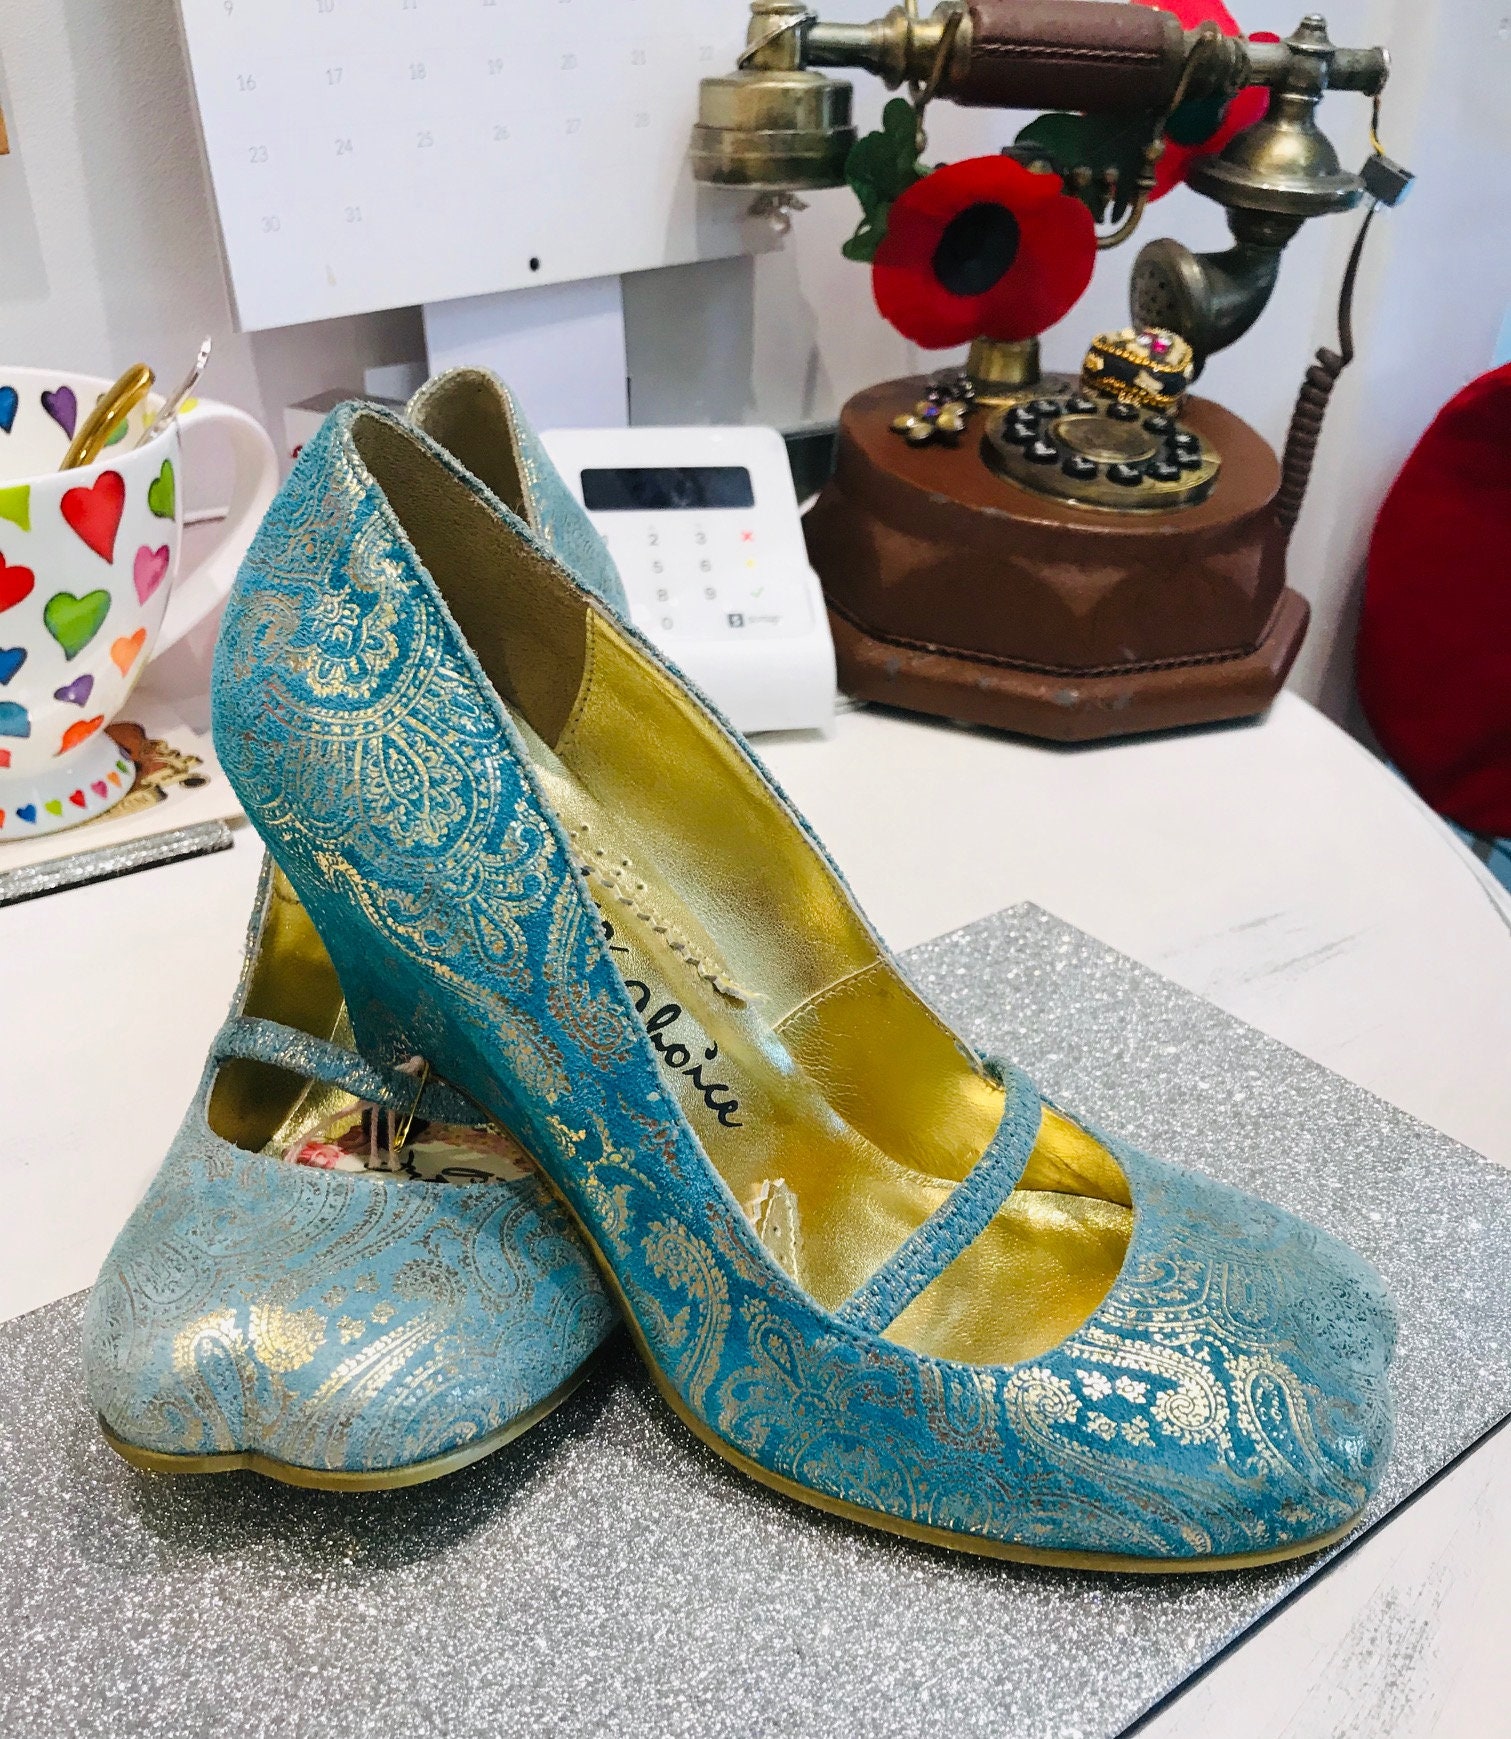 Or Double Toe Shoes Chaussures Chaussures femme Escarpins Belle irregular Choice style vintage Turquoise Taille 38/UK 5 